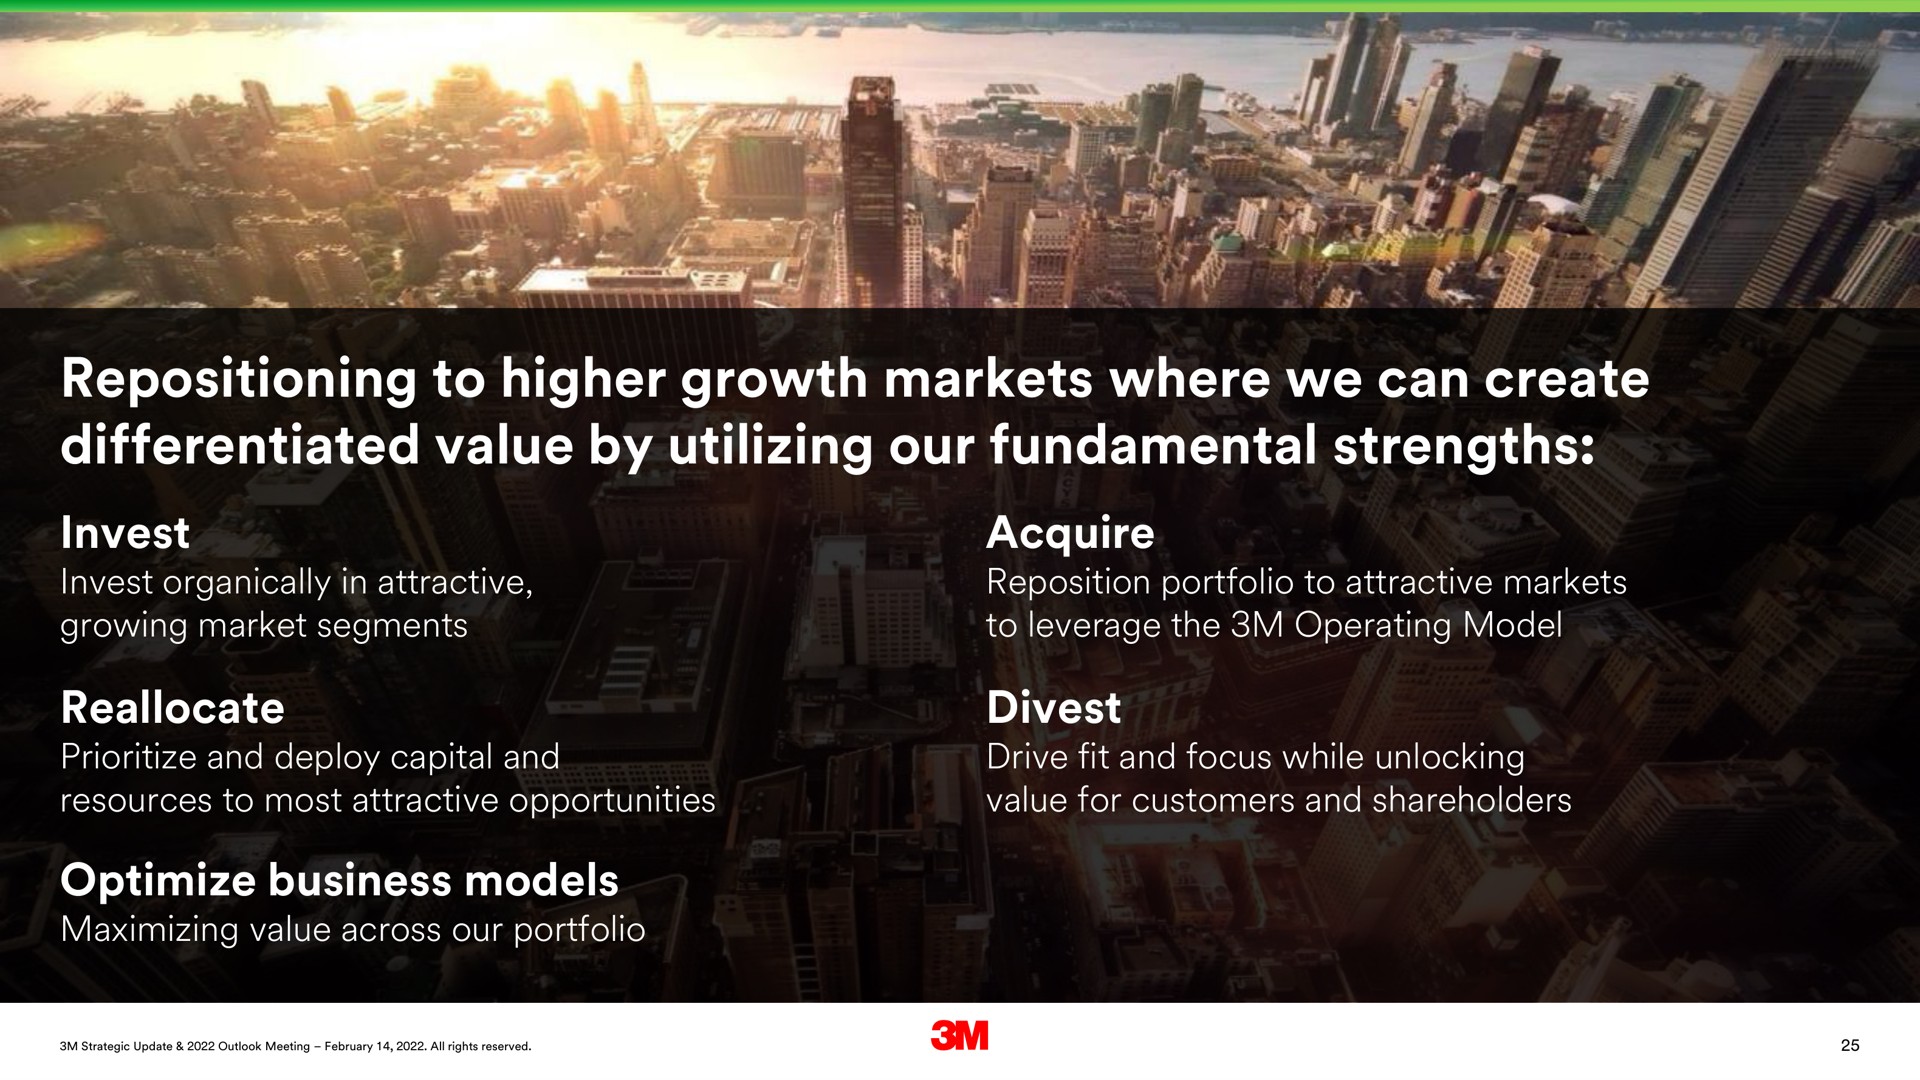 repositioning to higher growth markets where we can create differentiated value by utilizing our fundamental strengths invest reallocate optimize business models acquire divest tan | 3M